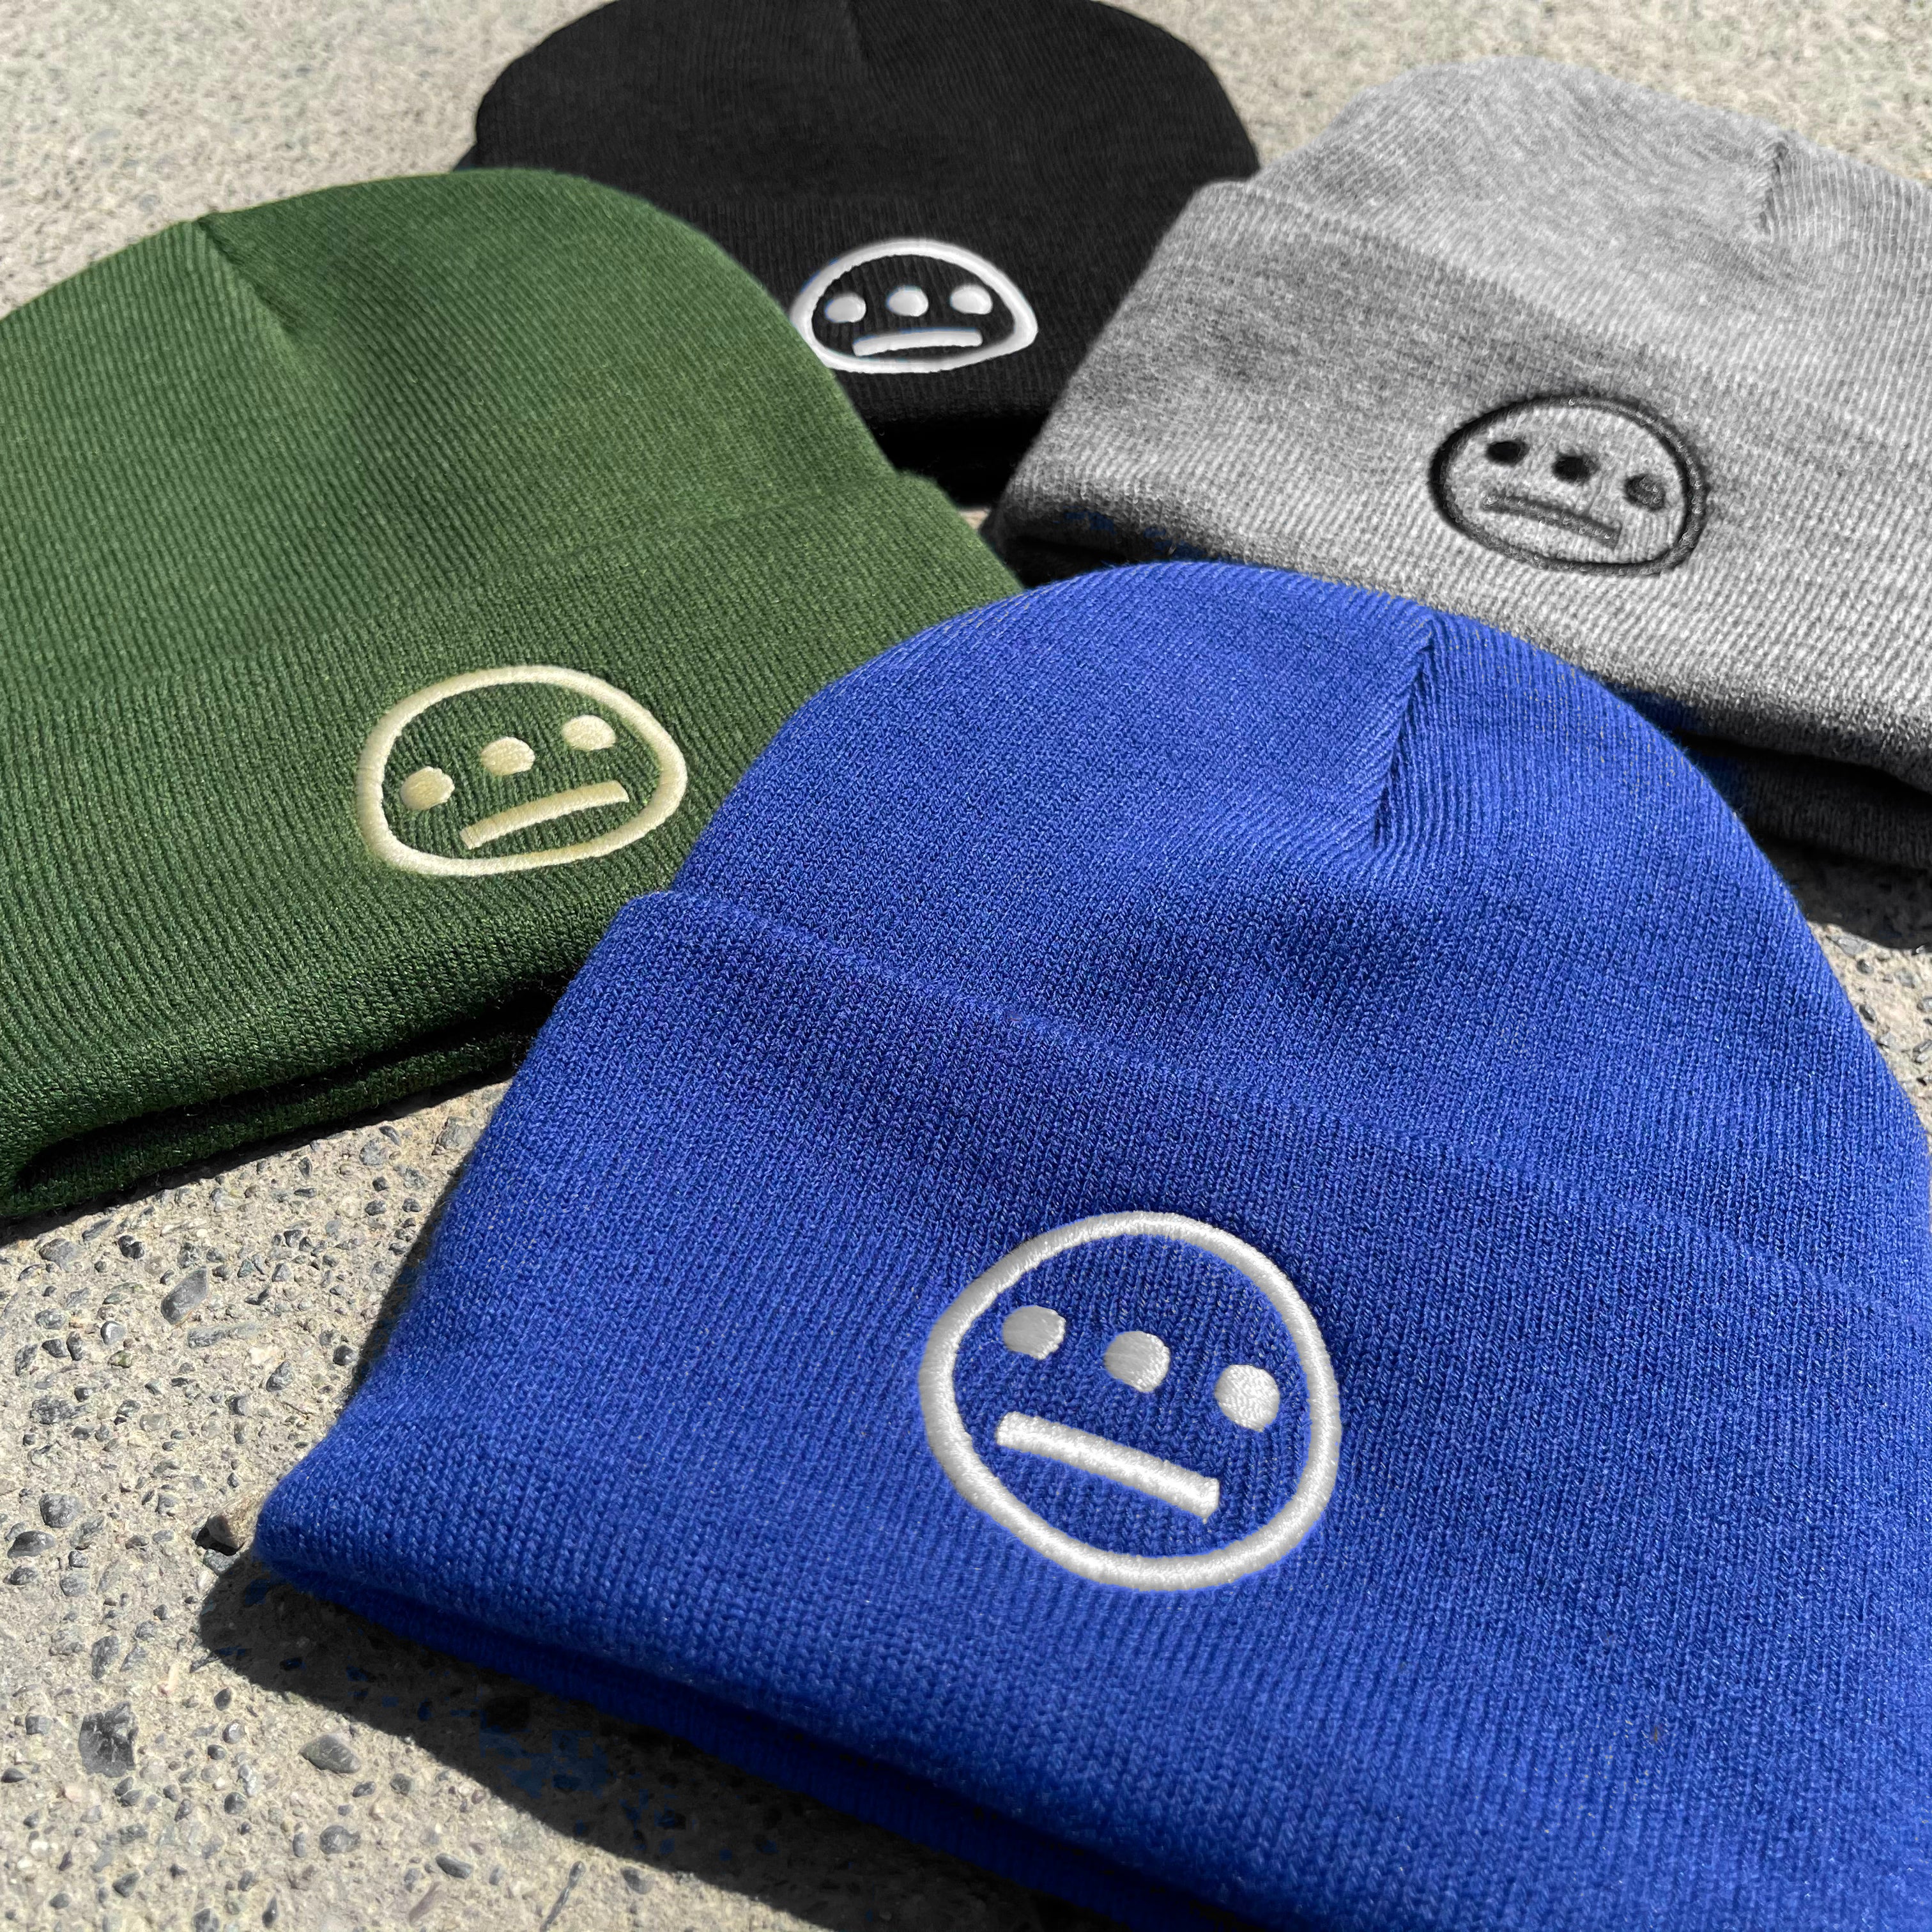 Close-up of 4 cuffed acrylic beanies in green, blue, black & grey, with white embroidered Hiero logos on on ashpalt.